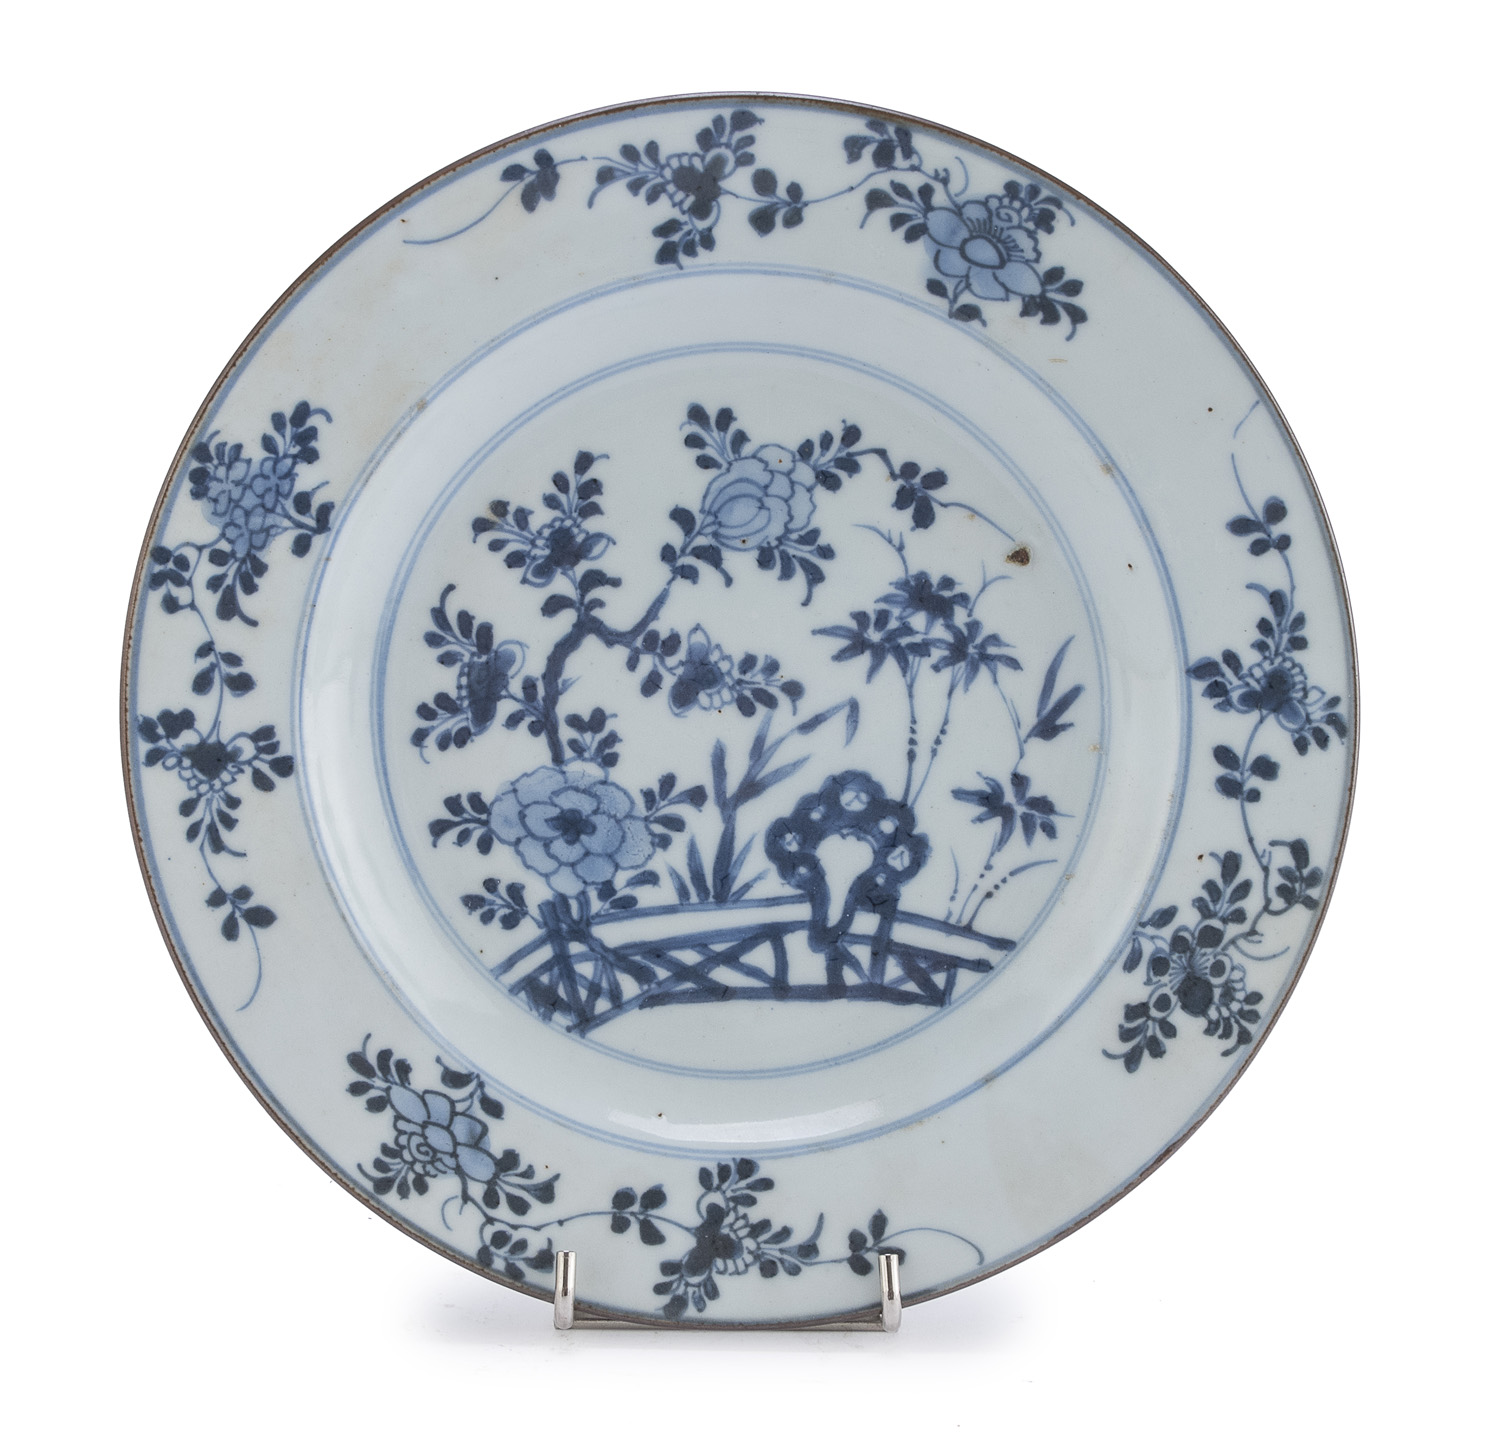 A CHINESE WHITE AND BLUE PORCELAIN DISH LATE 18TH CENTURY.